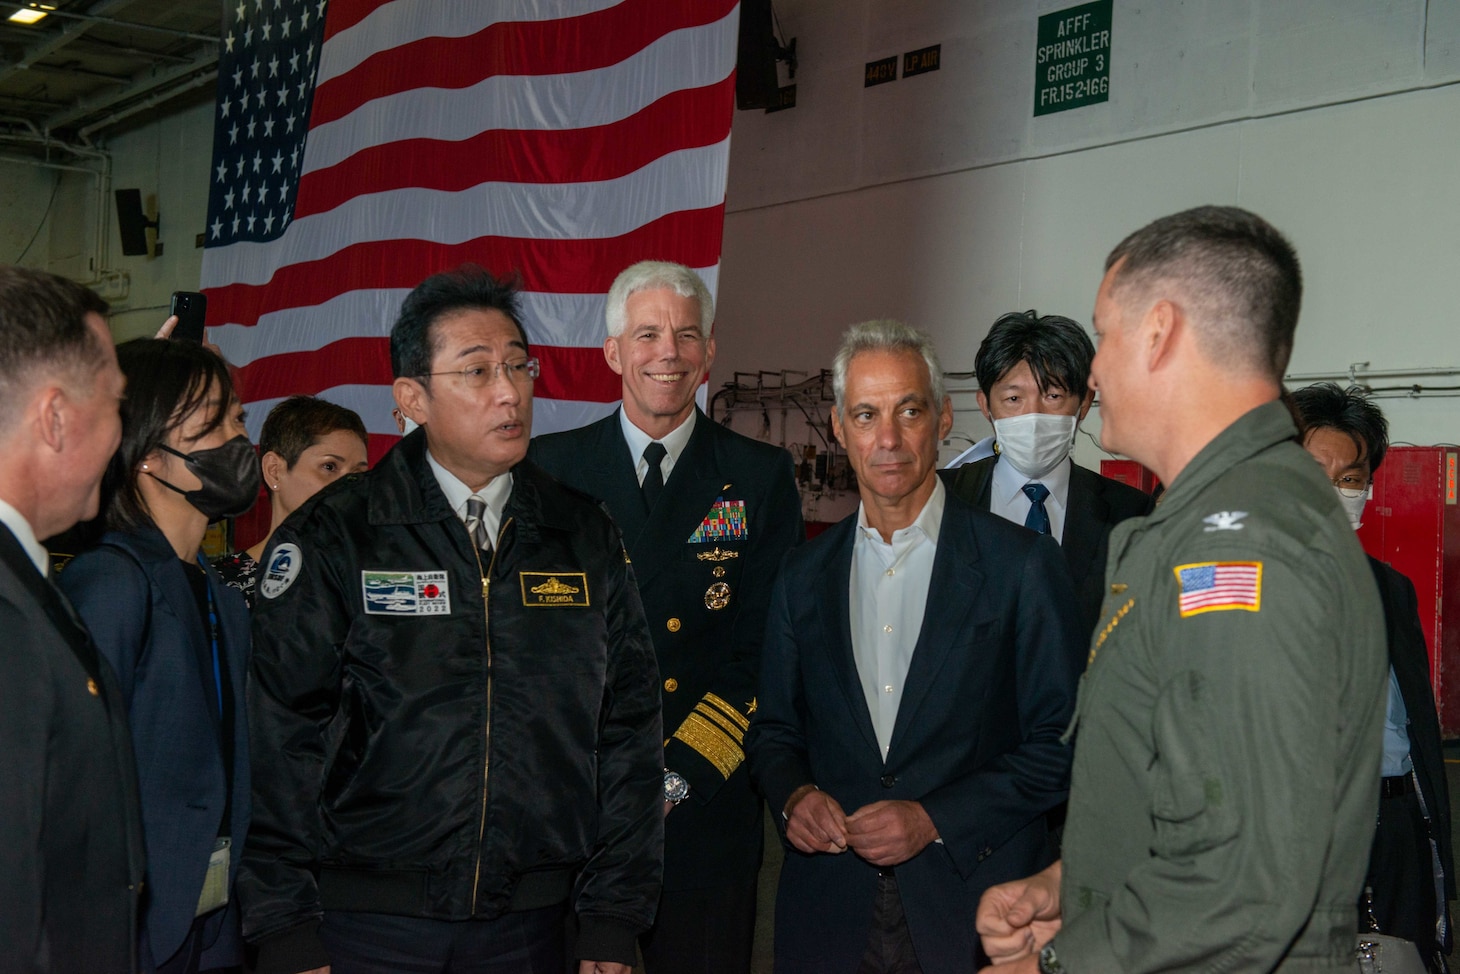 SAGAMI WAN (Nov. 6, 2022) Japan Prime Minister Fumio Kishida, left, Honorable Rahm Emanuel, right, U.S. ambassador to Japan, and Vice Adm. Karl Thomas, center, commander, U.S. 7th Fleet, tour the hangar  led by Capt. Michael Sweeny, commander, Carrier Air Wing 5, aboard the U.S. Navy’s only forward-deployed aircraft carrier, USS Ronald Reagan (CVN 76), during the Japan Maritime Self-Defense Force Fleet Review 2022, in the Sagami Wan, Nov. 6. Ronald Reagan, the flagship of Carrier Strike Group 5, provides a combat-ready force that protects and defends the United States, and supports alliances, partnerships and collective maritime interests in the Indo-Pacific region. (U.S. Navy photo by Mass Communication Specialist 2nd Class Michael B. Jarmiolowski)